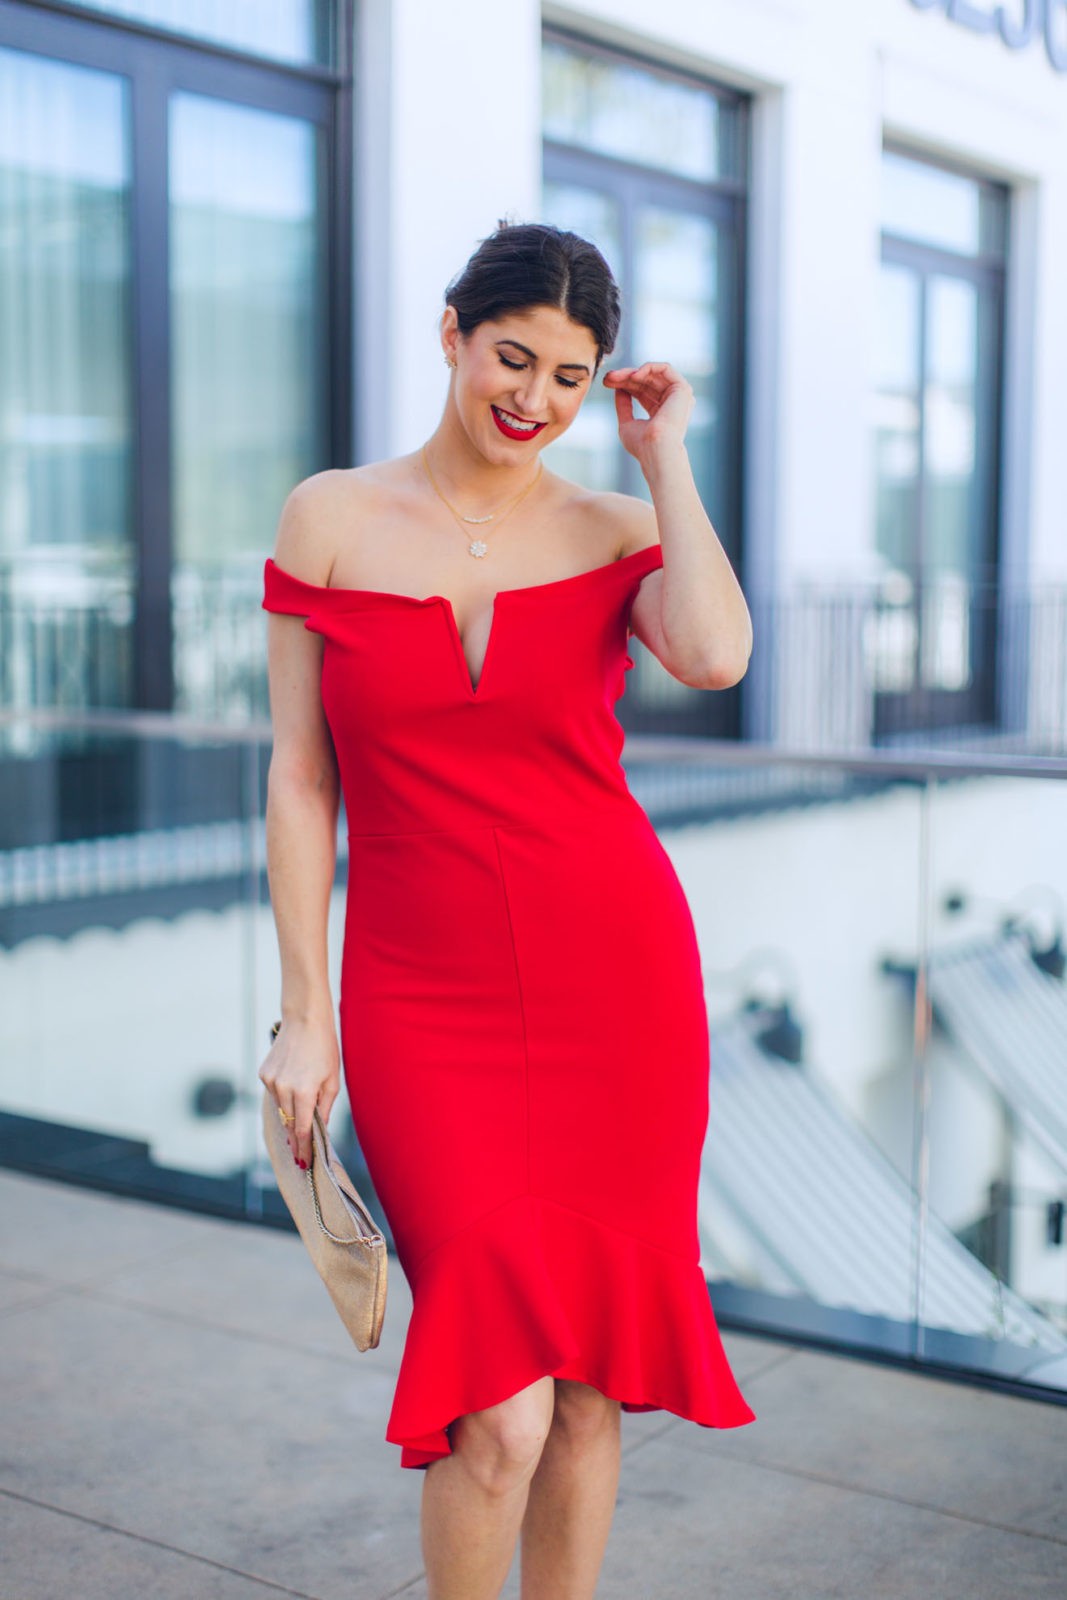 Laura Lily Fashion Travel and Lifestyle Blog, last minute Holiday outfit ideas, Nordstrom Buy Online Pick Up In Store, Missguided Red off the shoulder Dress, Gorjana Jewelry,Last minute gift ideas,